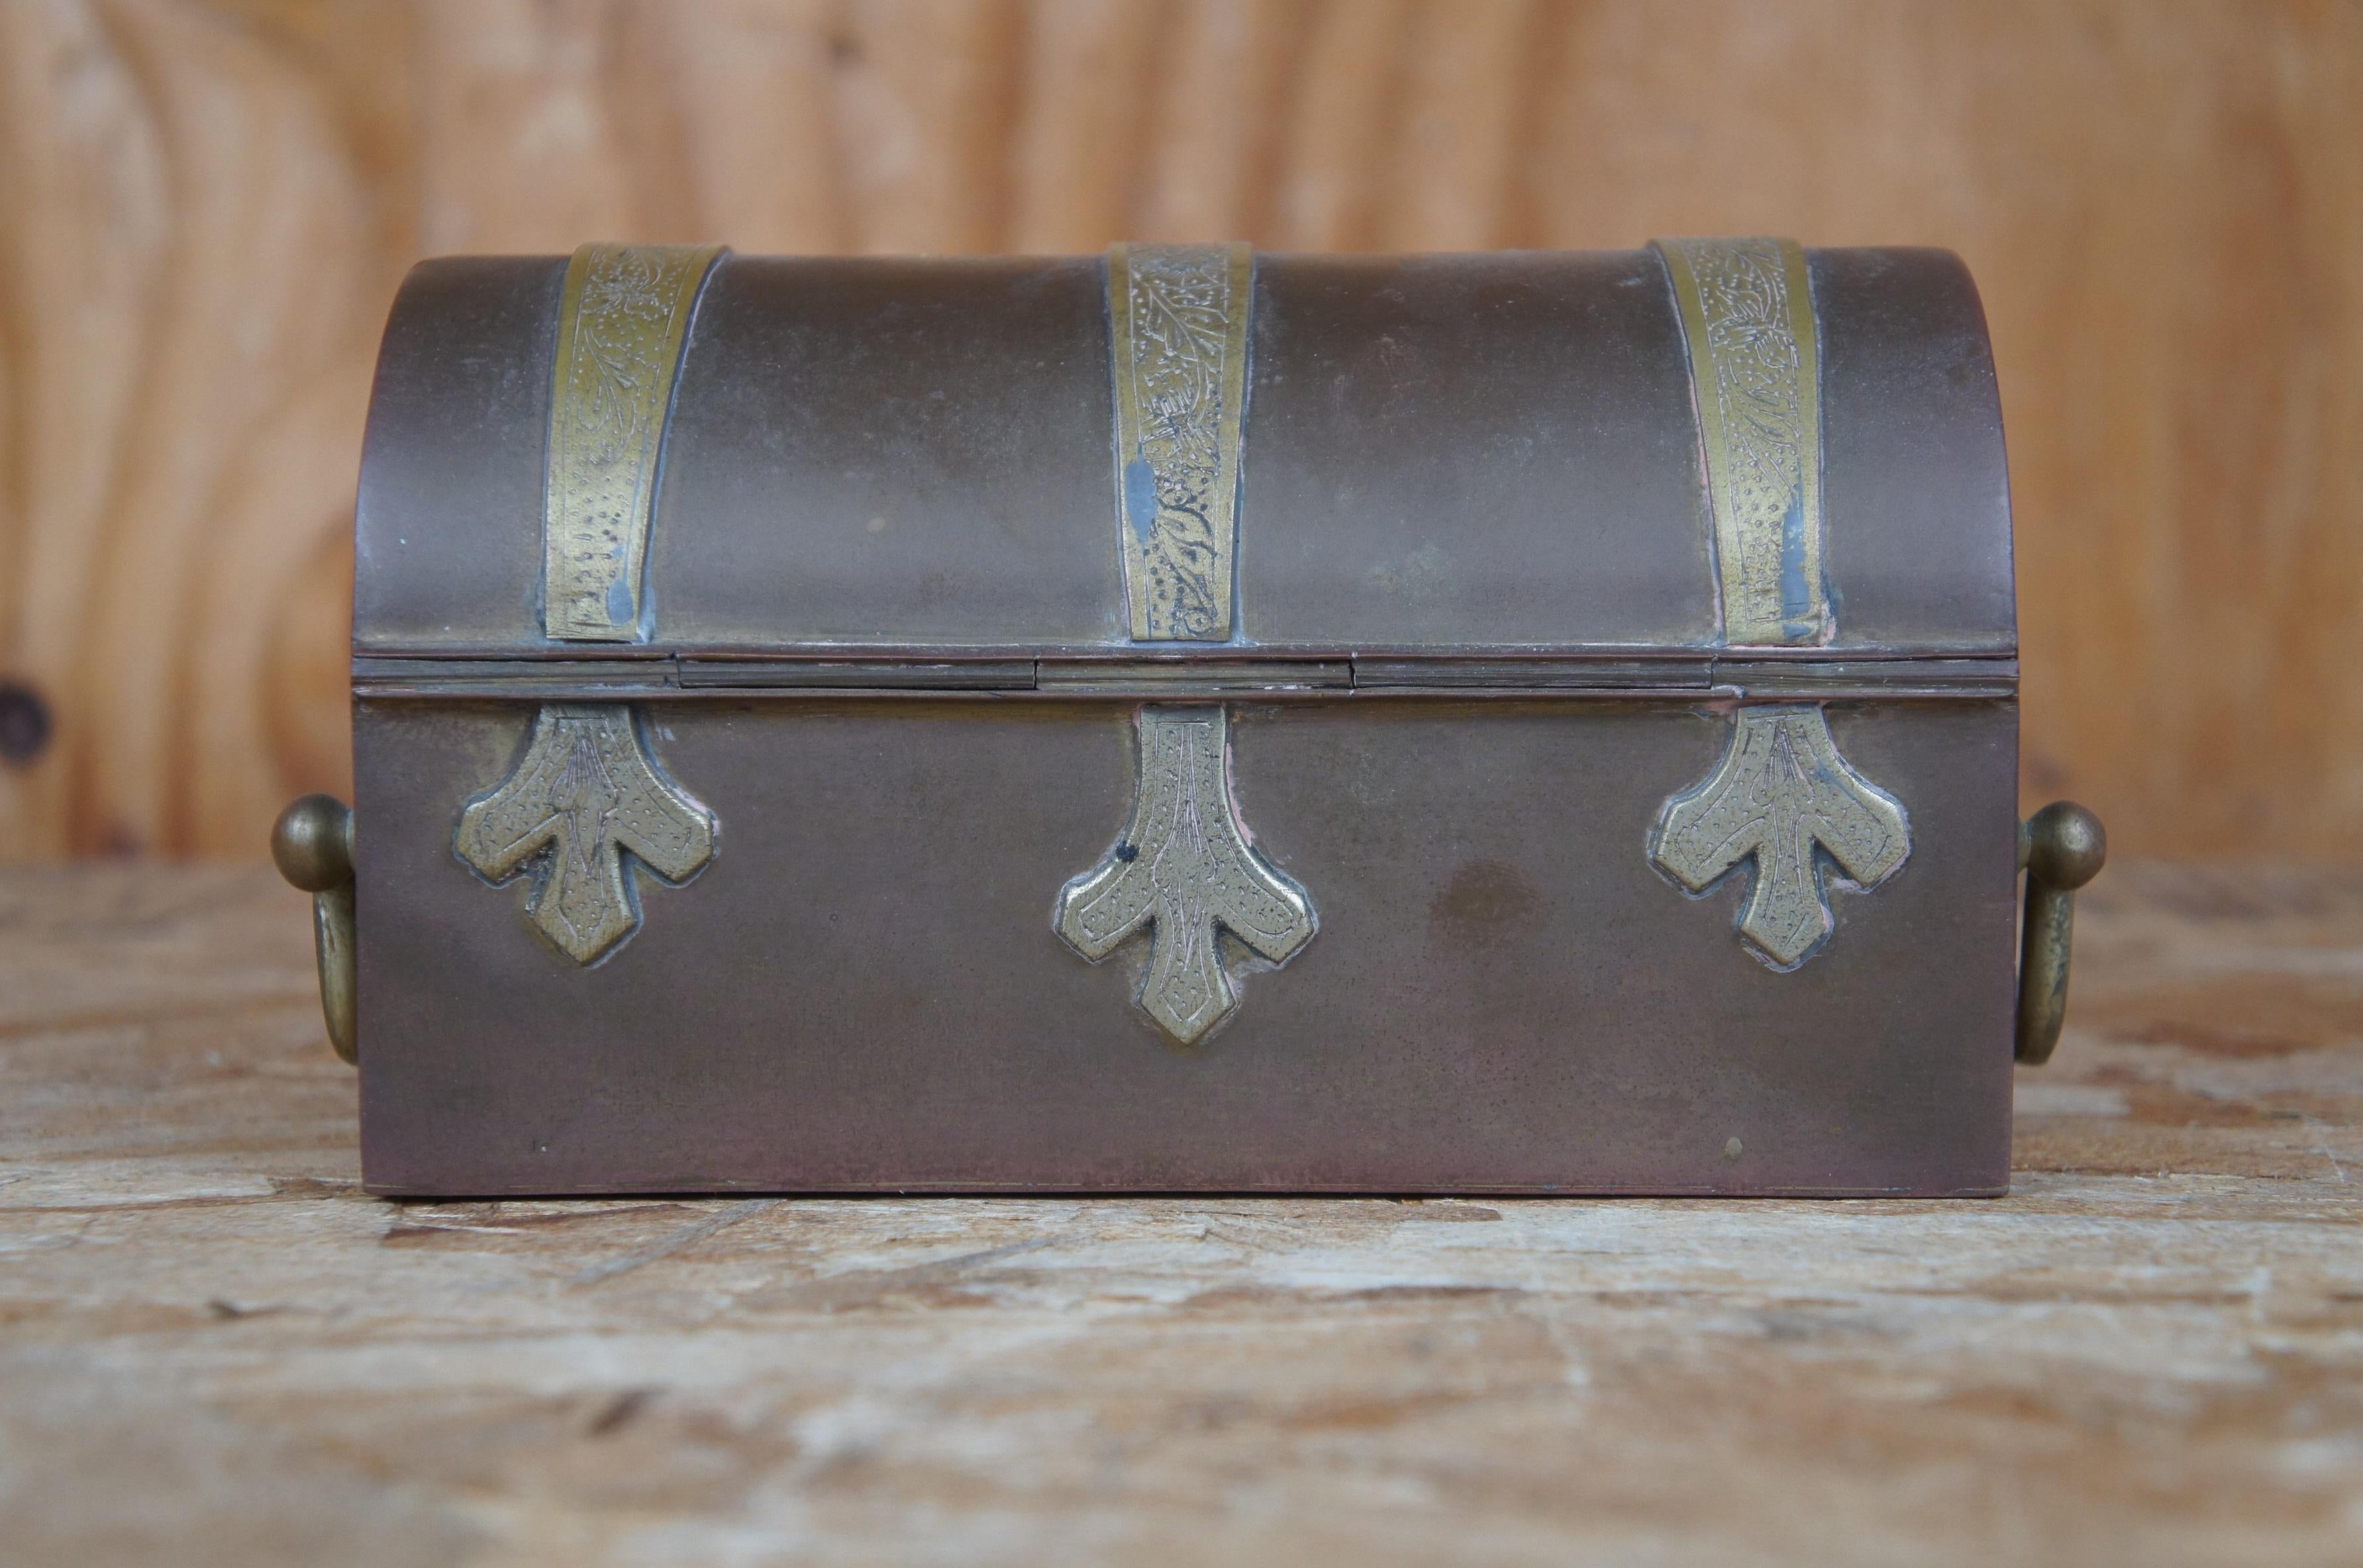 20th Century Antique Copper Brass Banded Domed Strongbox Treasure Chest Dowry Keepsake Box